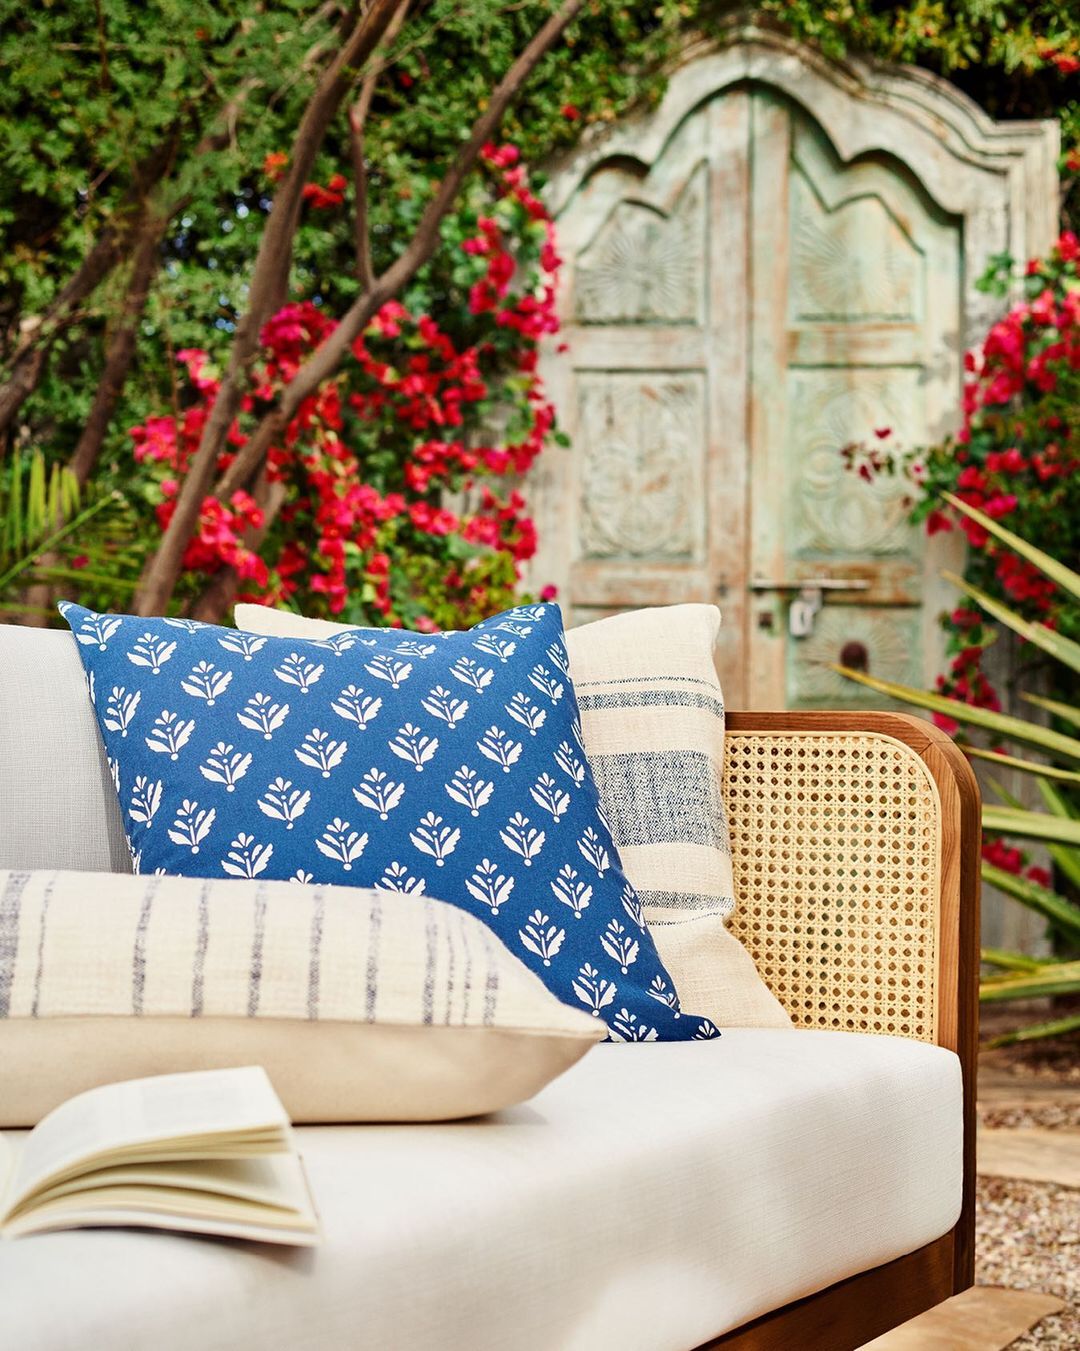 A couch with a book on it and styled with patterned pillows, perfect for creating your own summer home decor paradise.